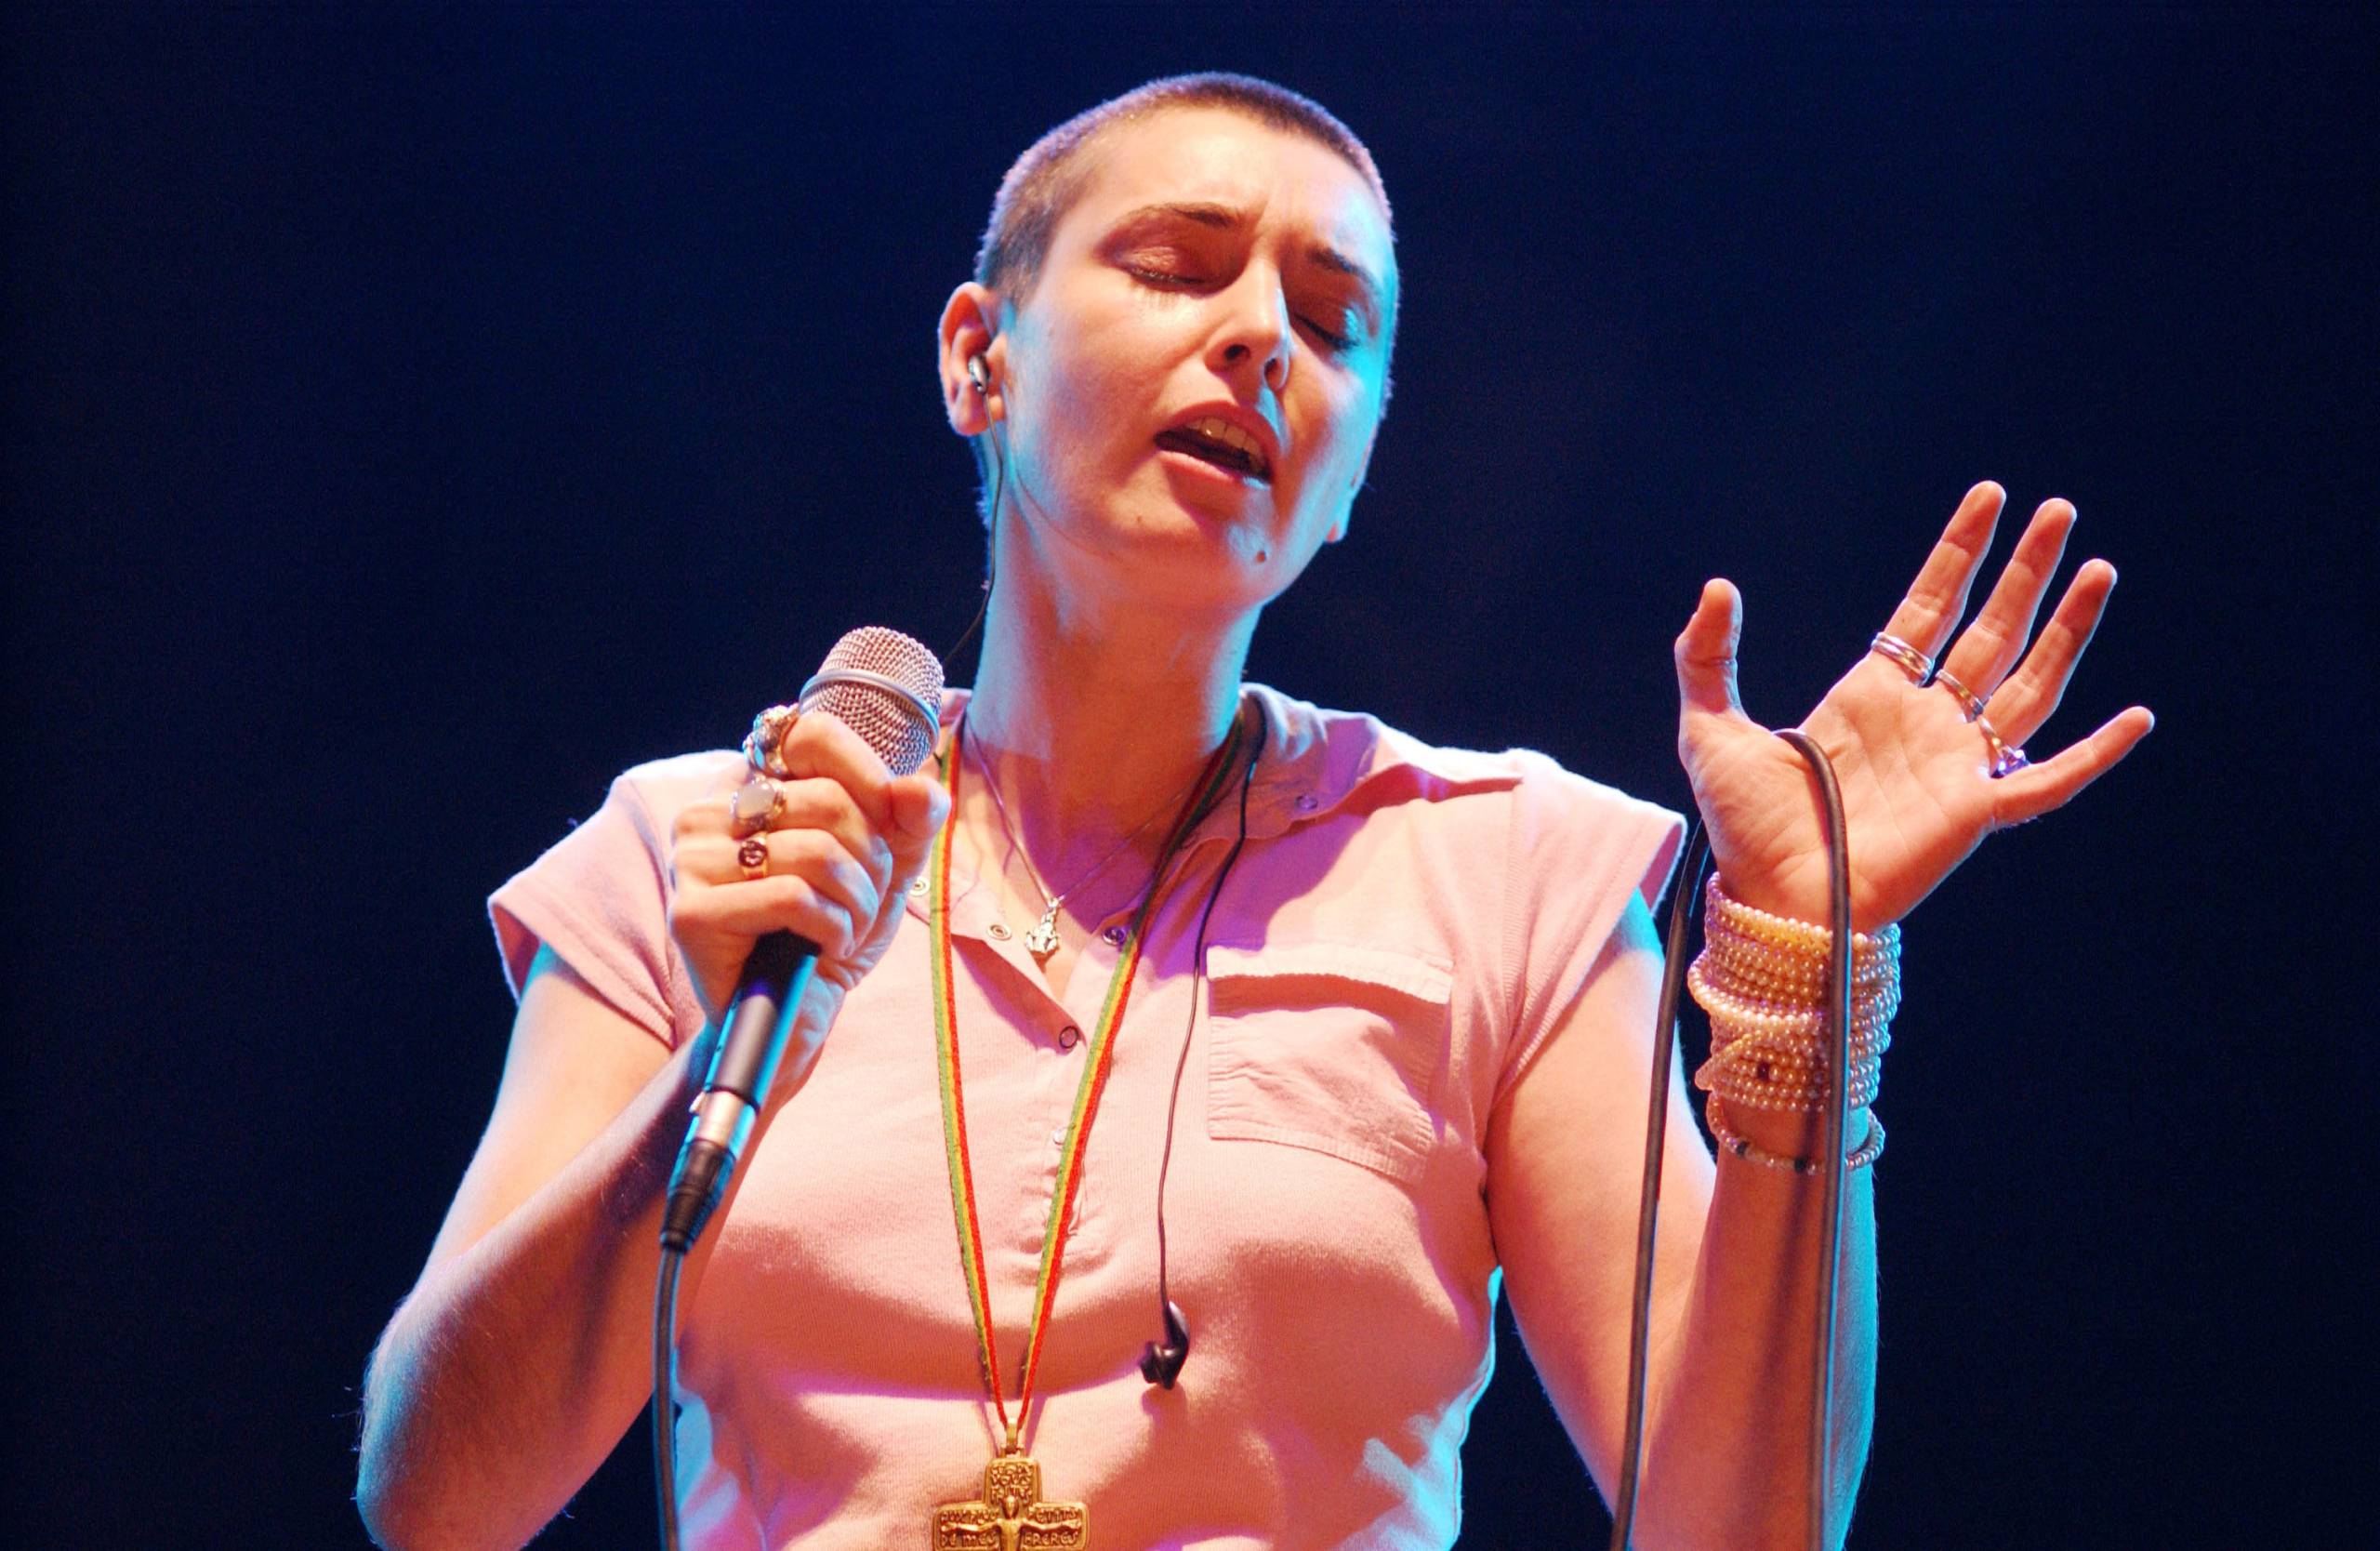 Woman with shaved hair in pink polo shirt sings with eyes closed